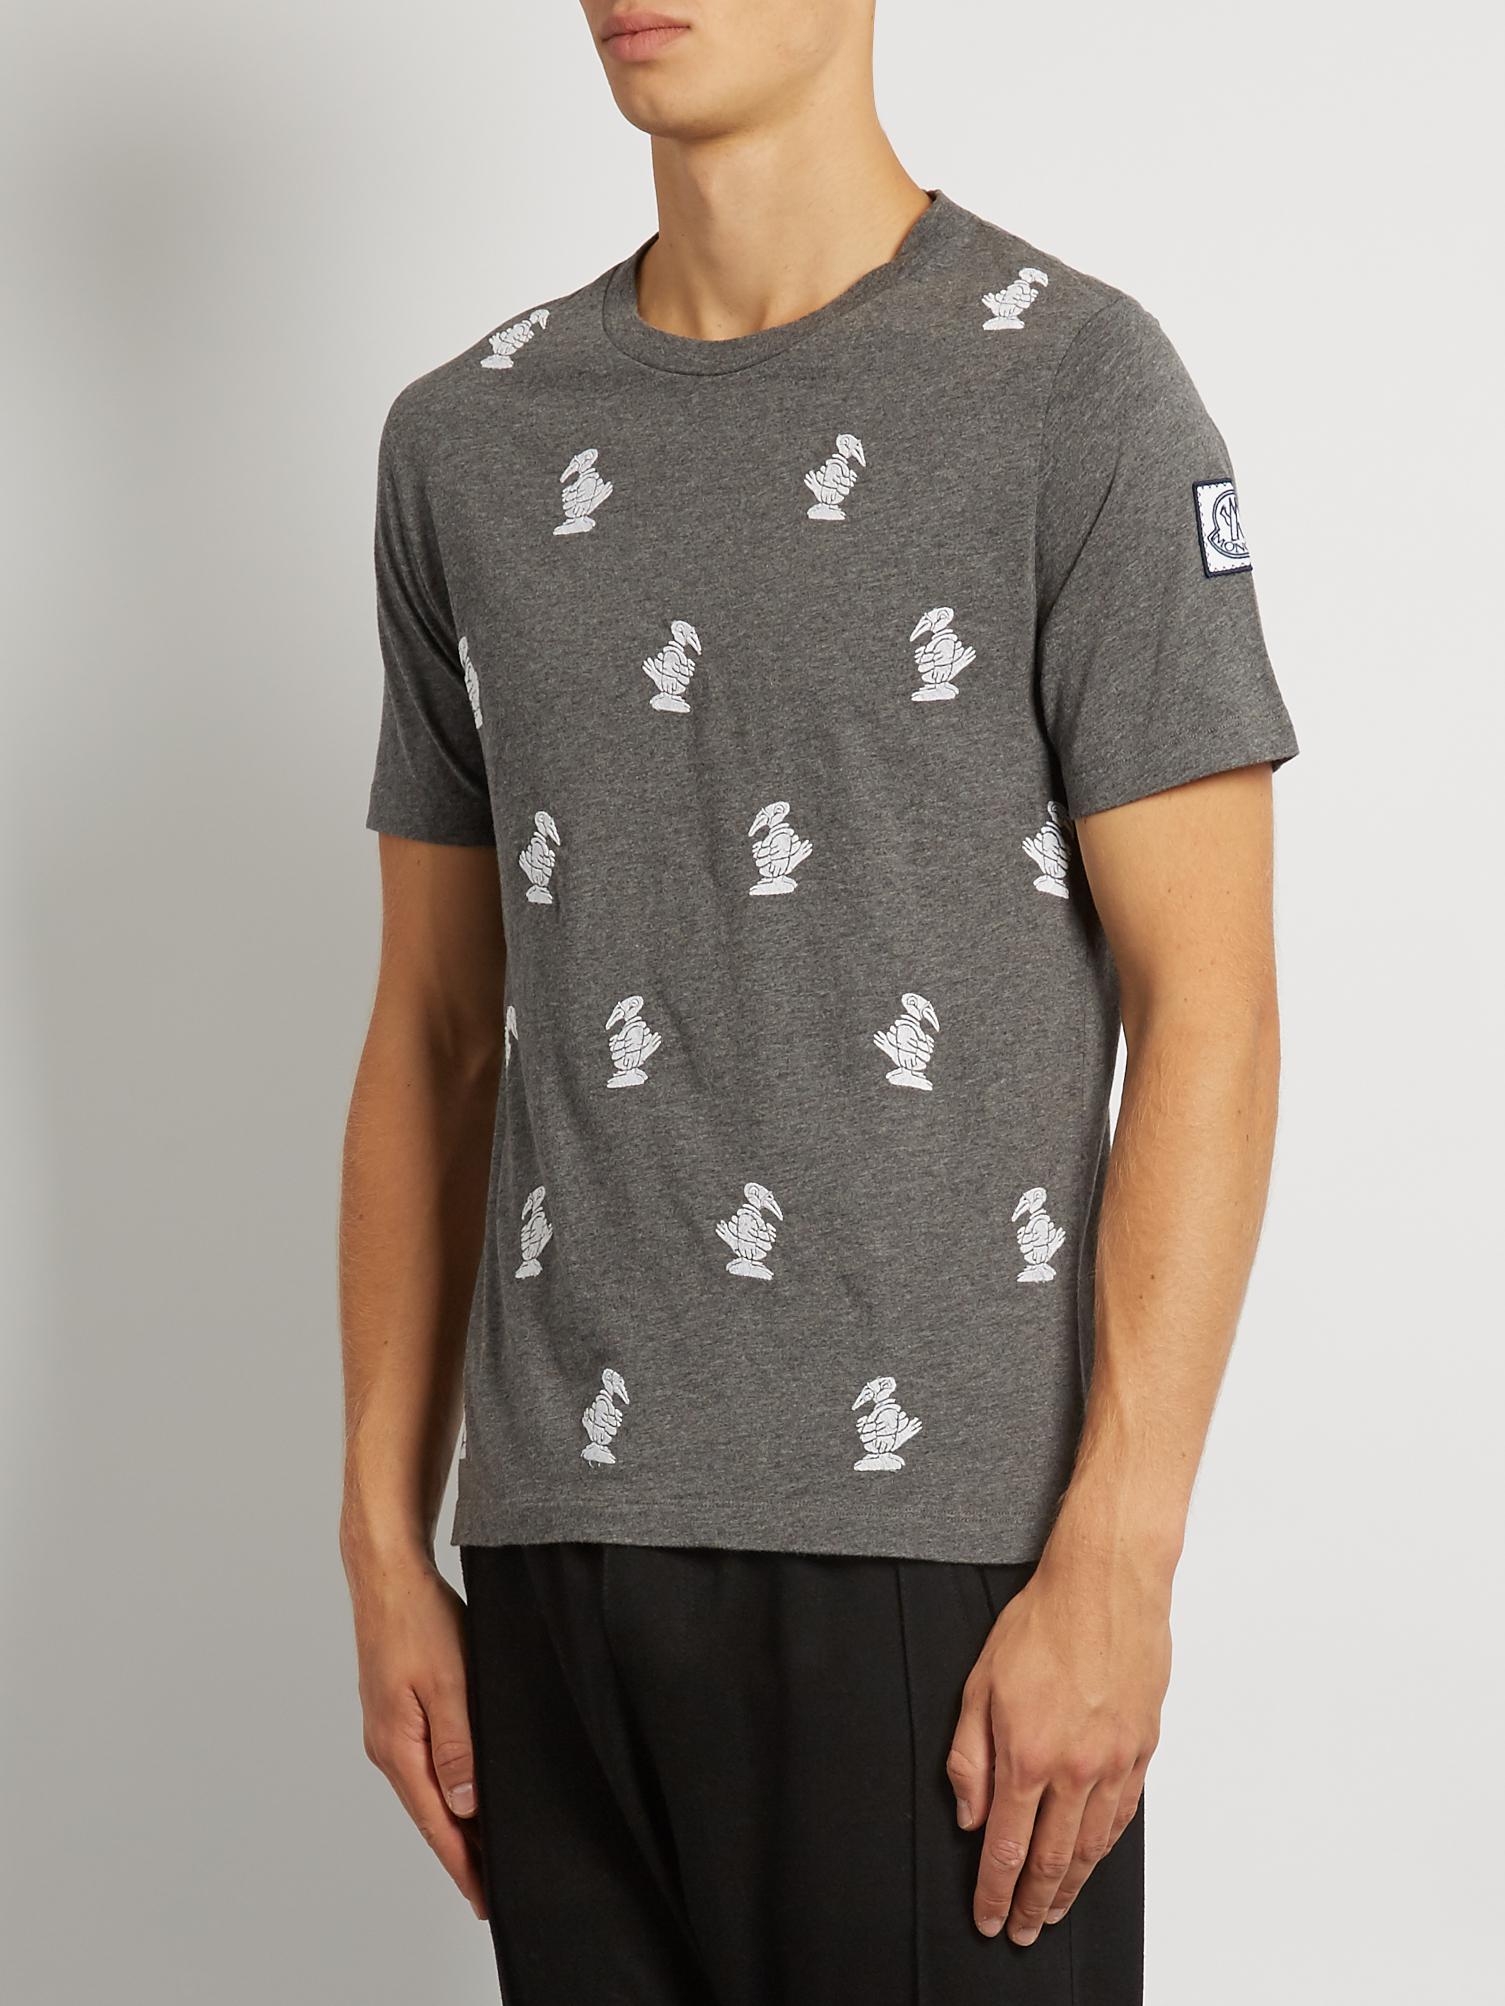 Moncler Gamme Bleu Duck-embroidered Crew-neck Cotton T-shirt in Gray for  Men - Lyst